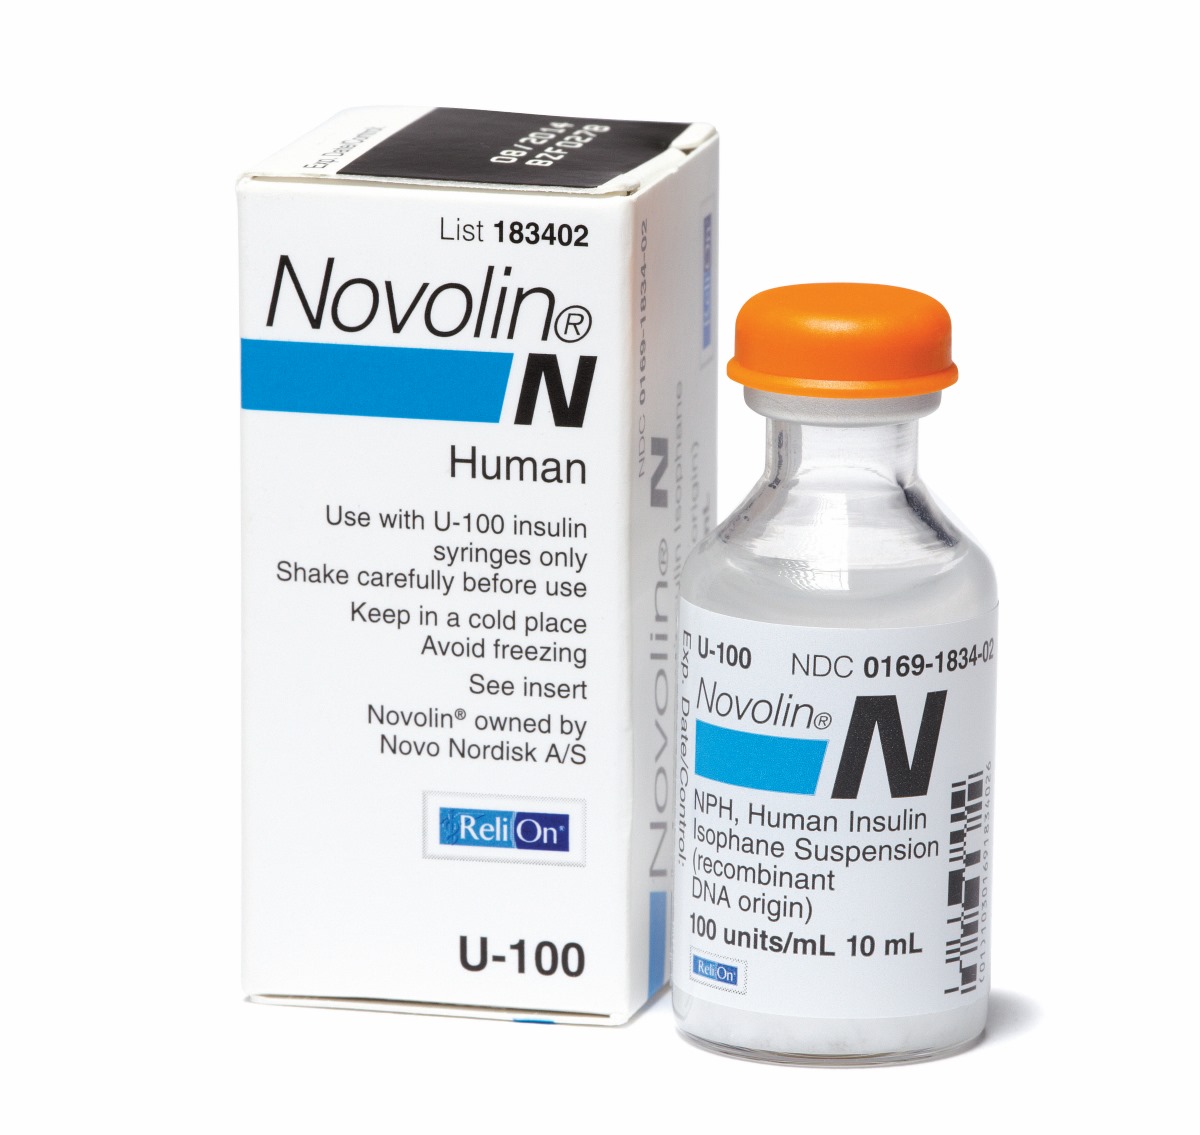 How To Store Novolin N